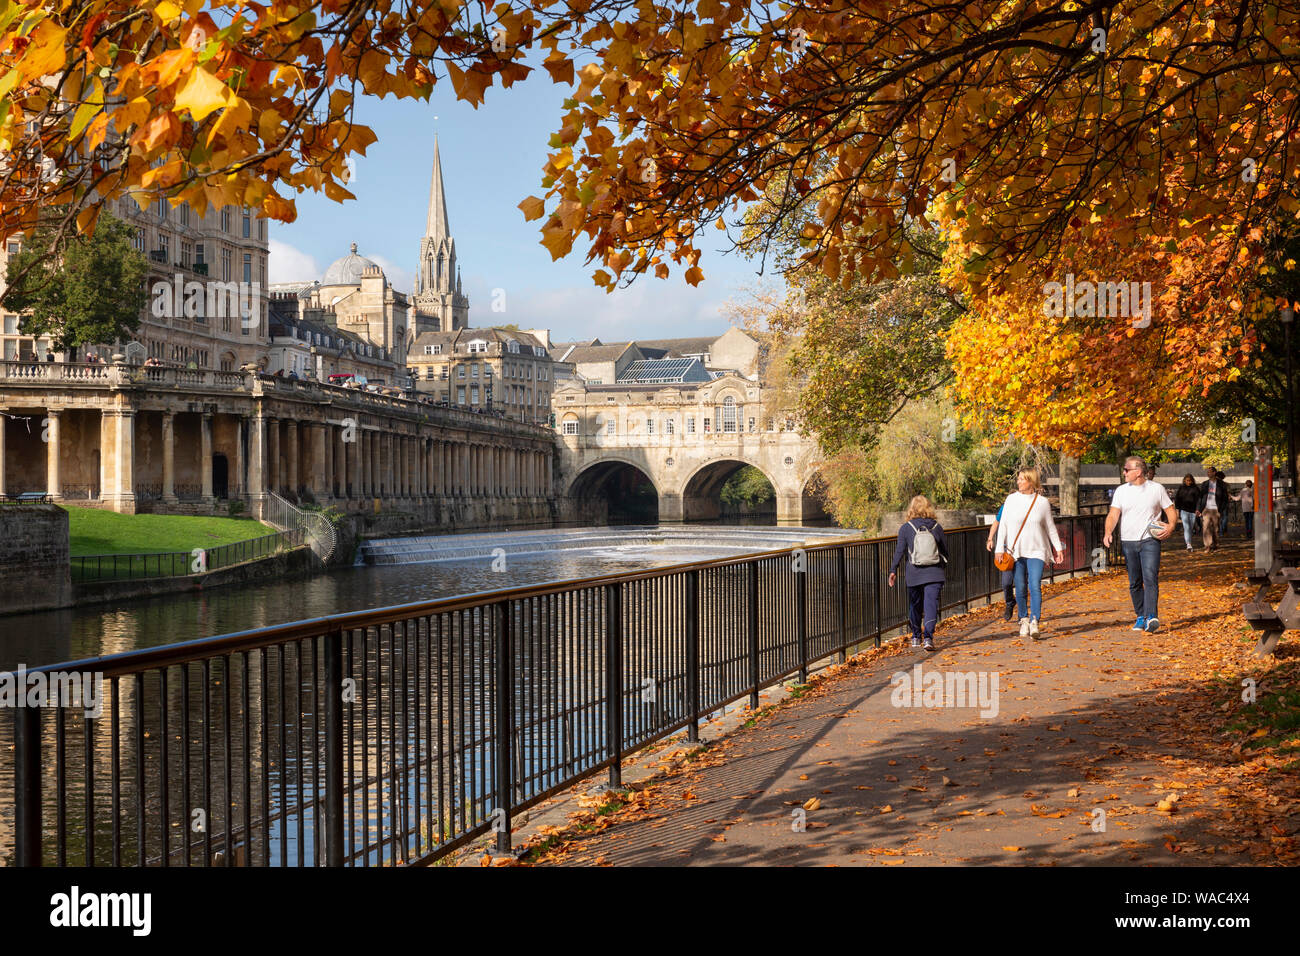 BATH, UK - October 20, 2018 : People walking beside the river Avon in the historic centre of Bath surrounded by autumnal trees. Stock Photo